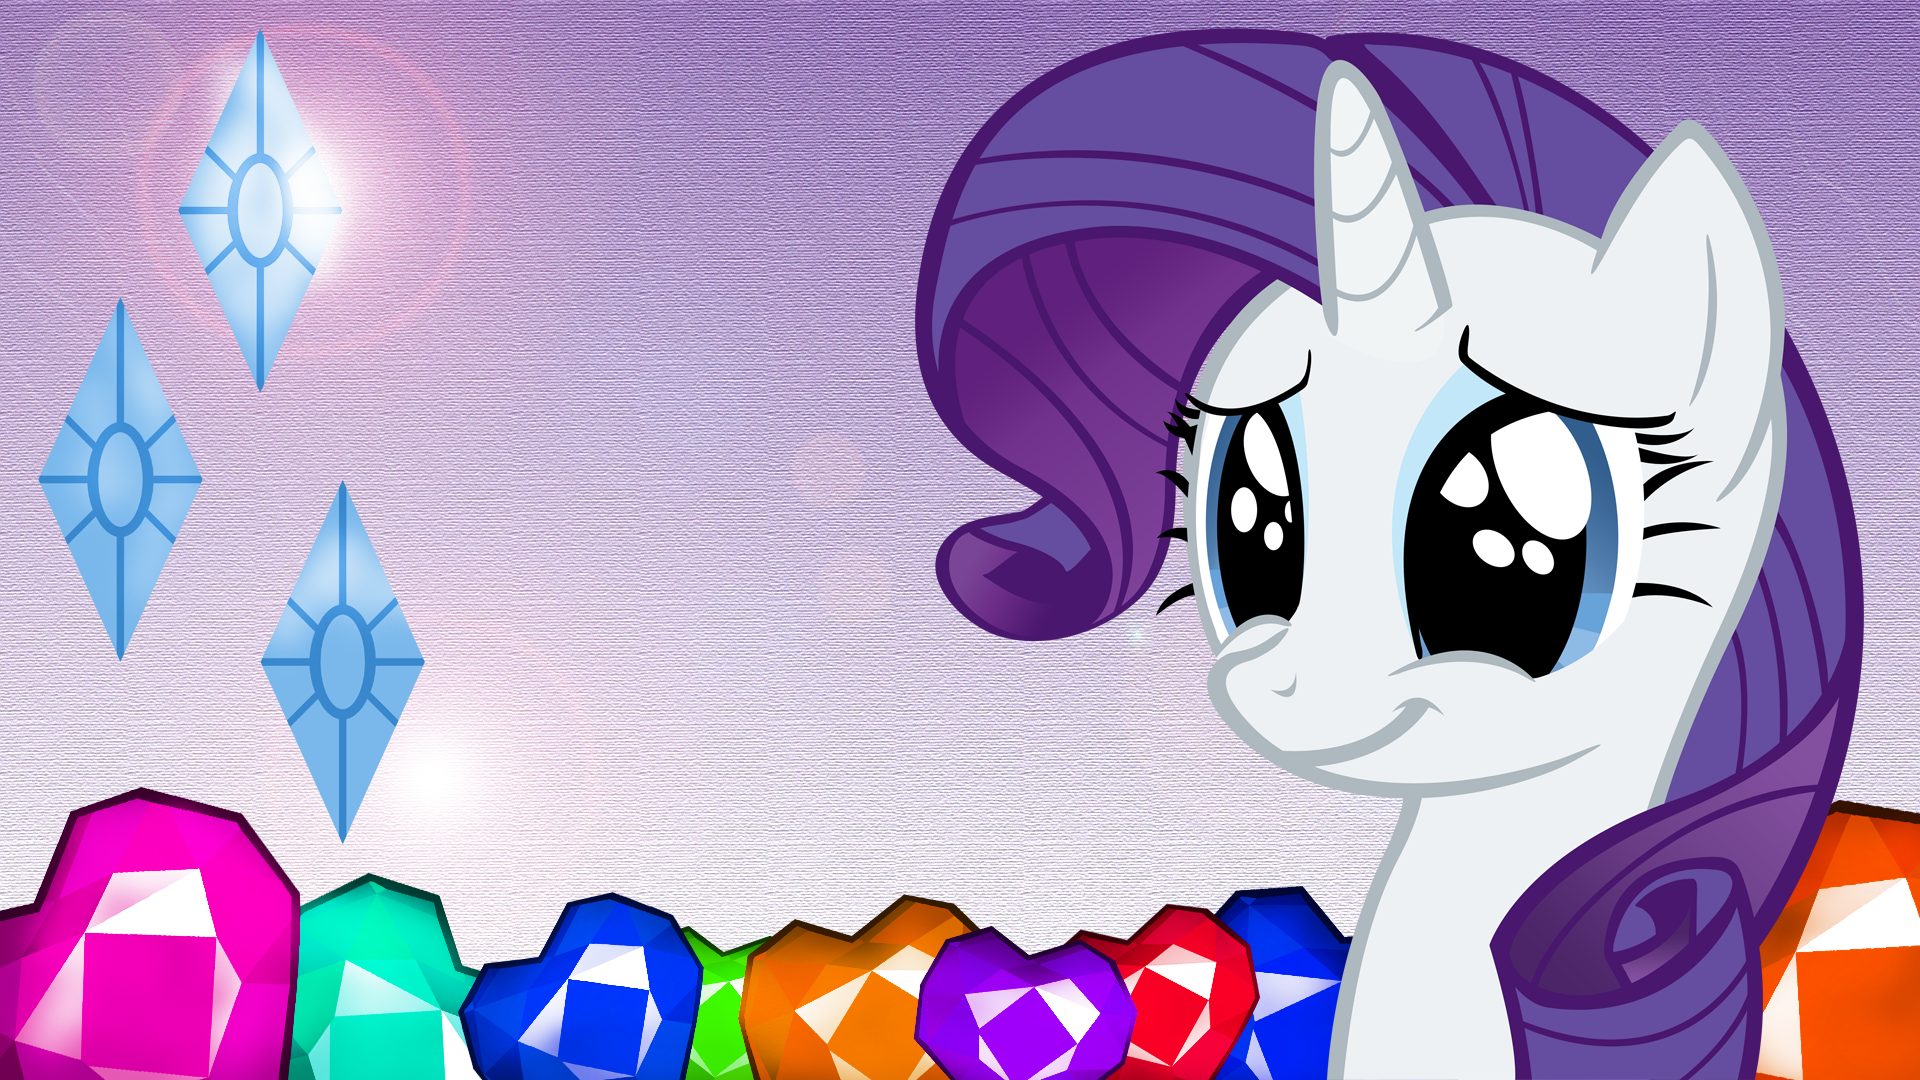 Rarity is Pleased - Wallpaper by EdwardTen, GrugDude, GuruGrendo and Santafer